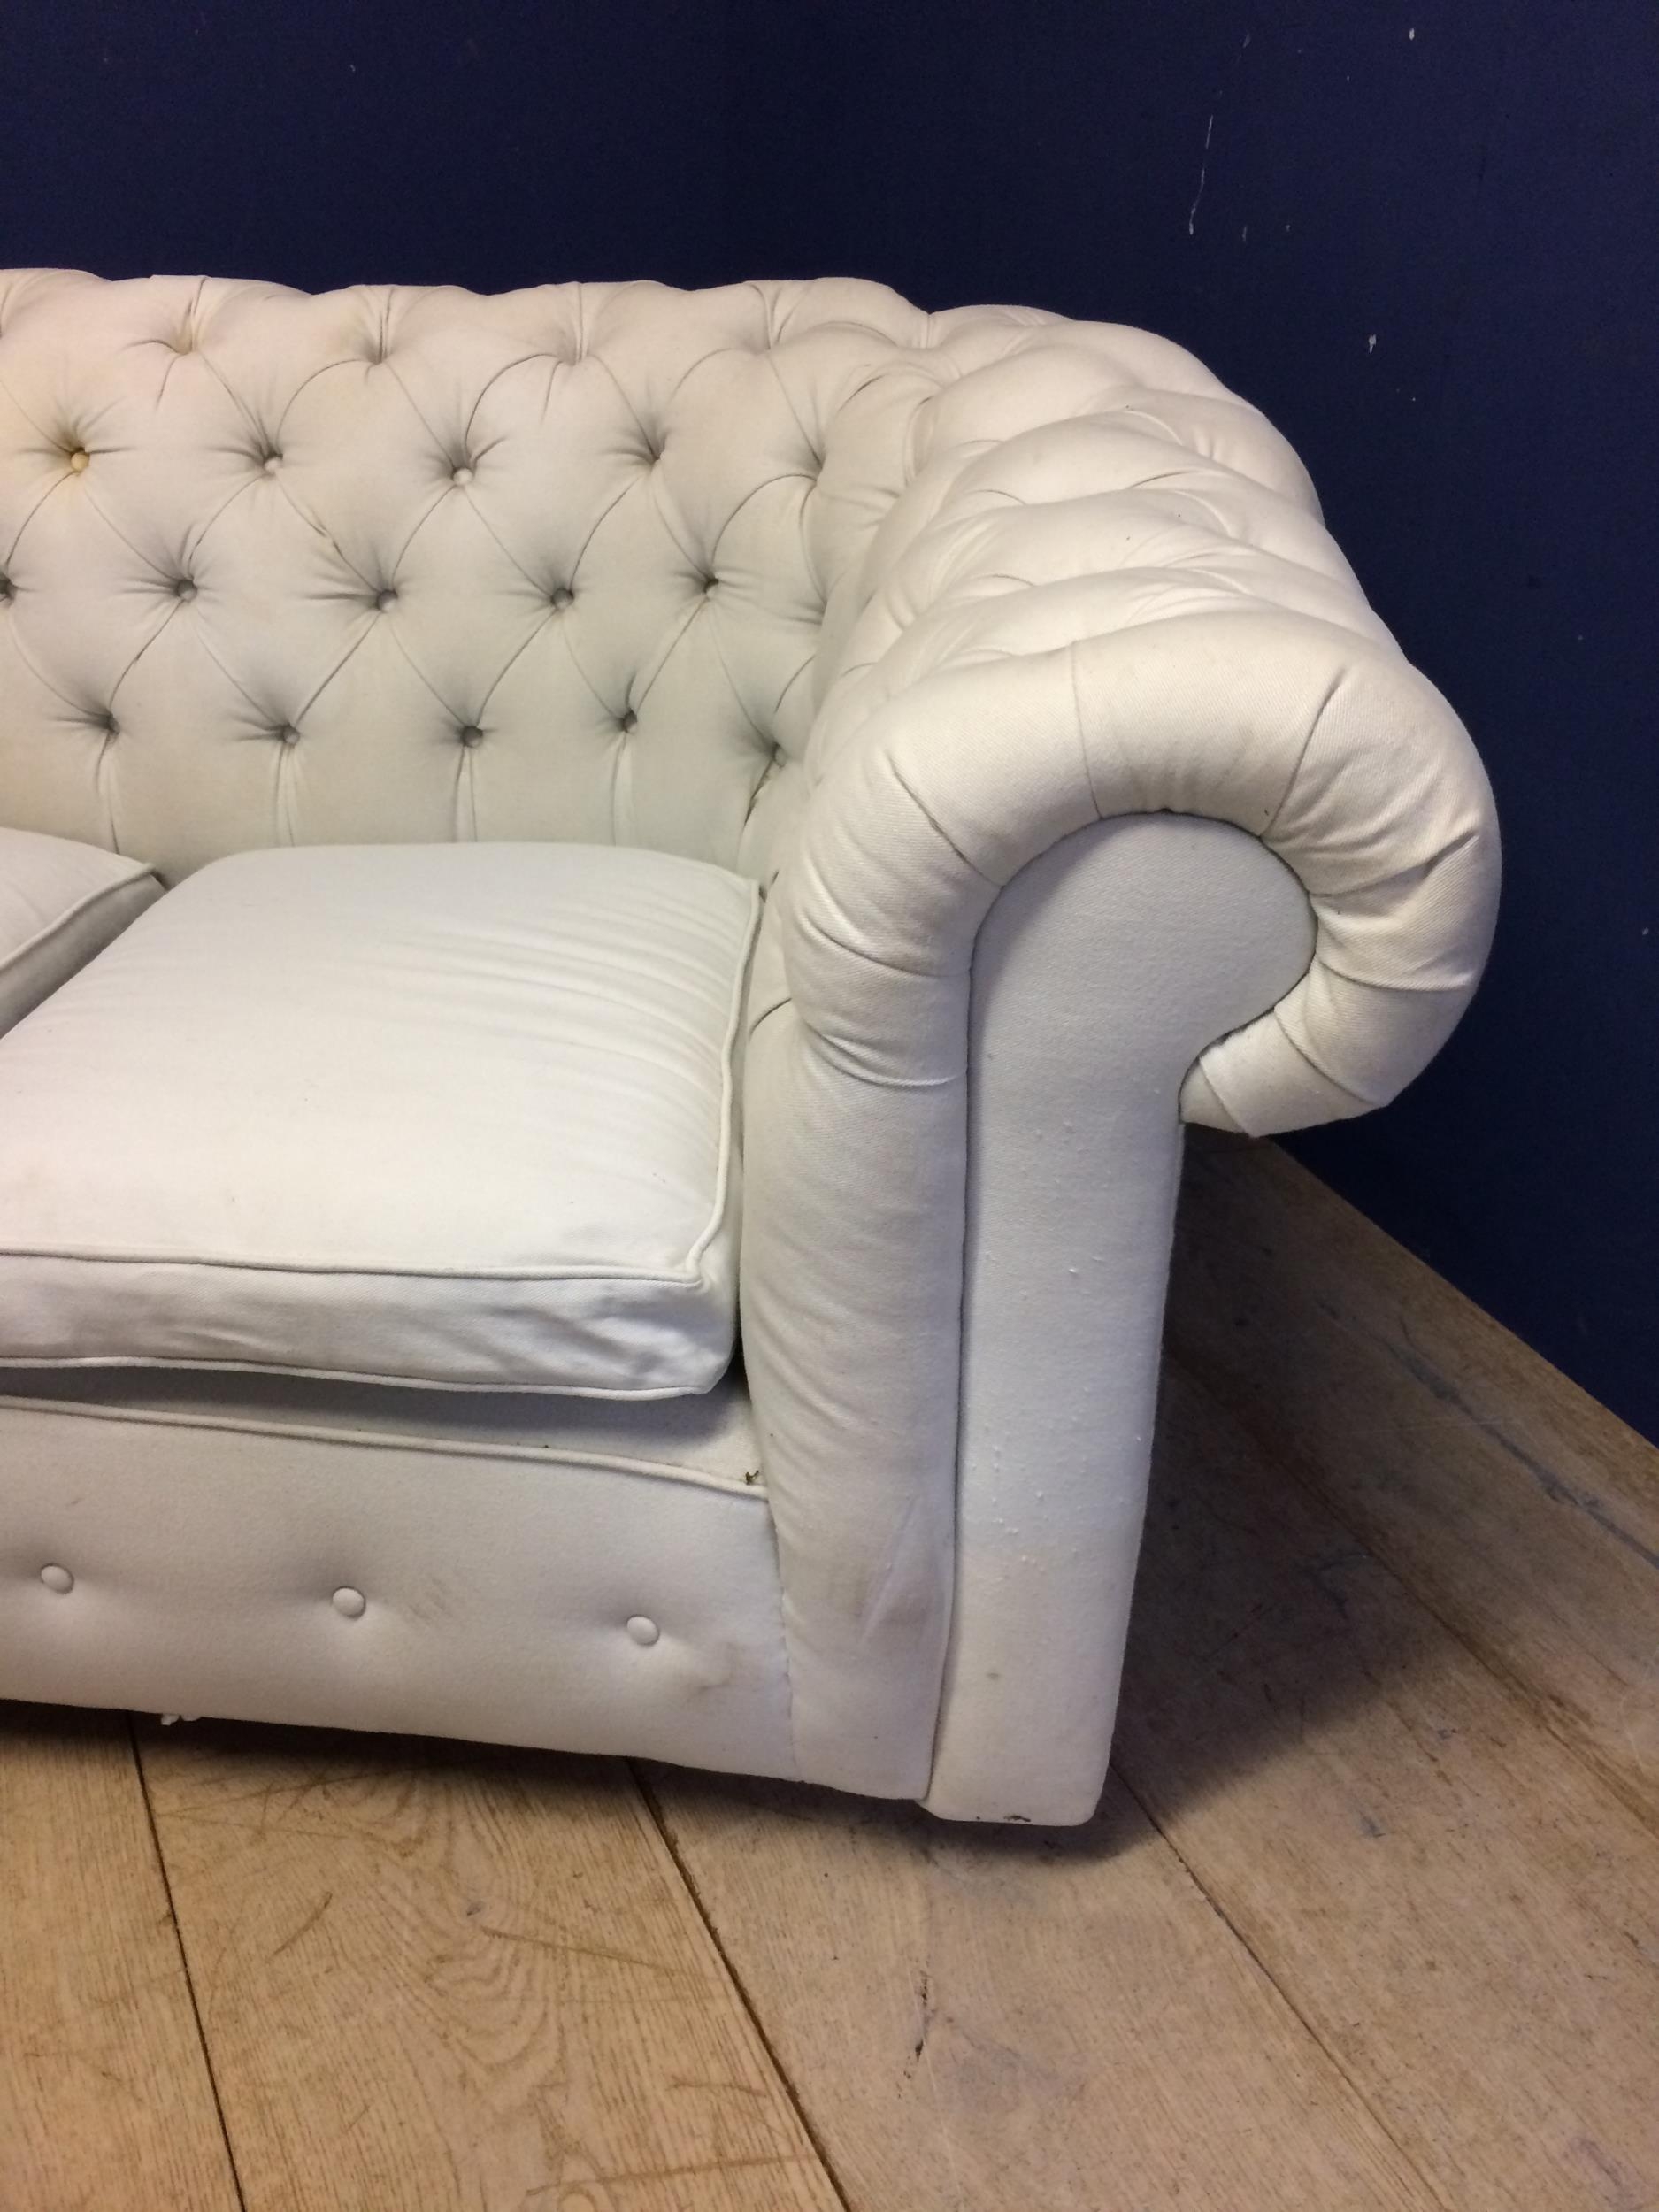 Victorian chesterfield sofa, upholstered in a light coloured fabric (some areas grubby with marks, - Image 2 of 5